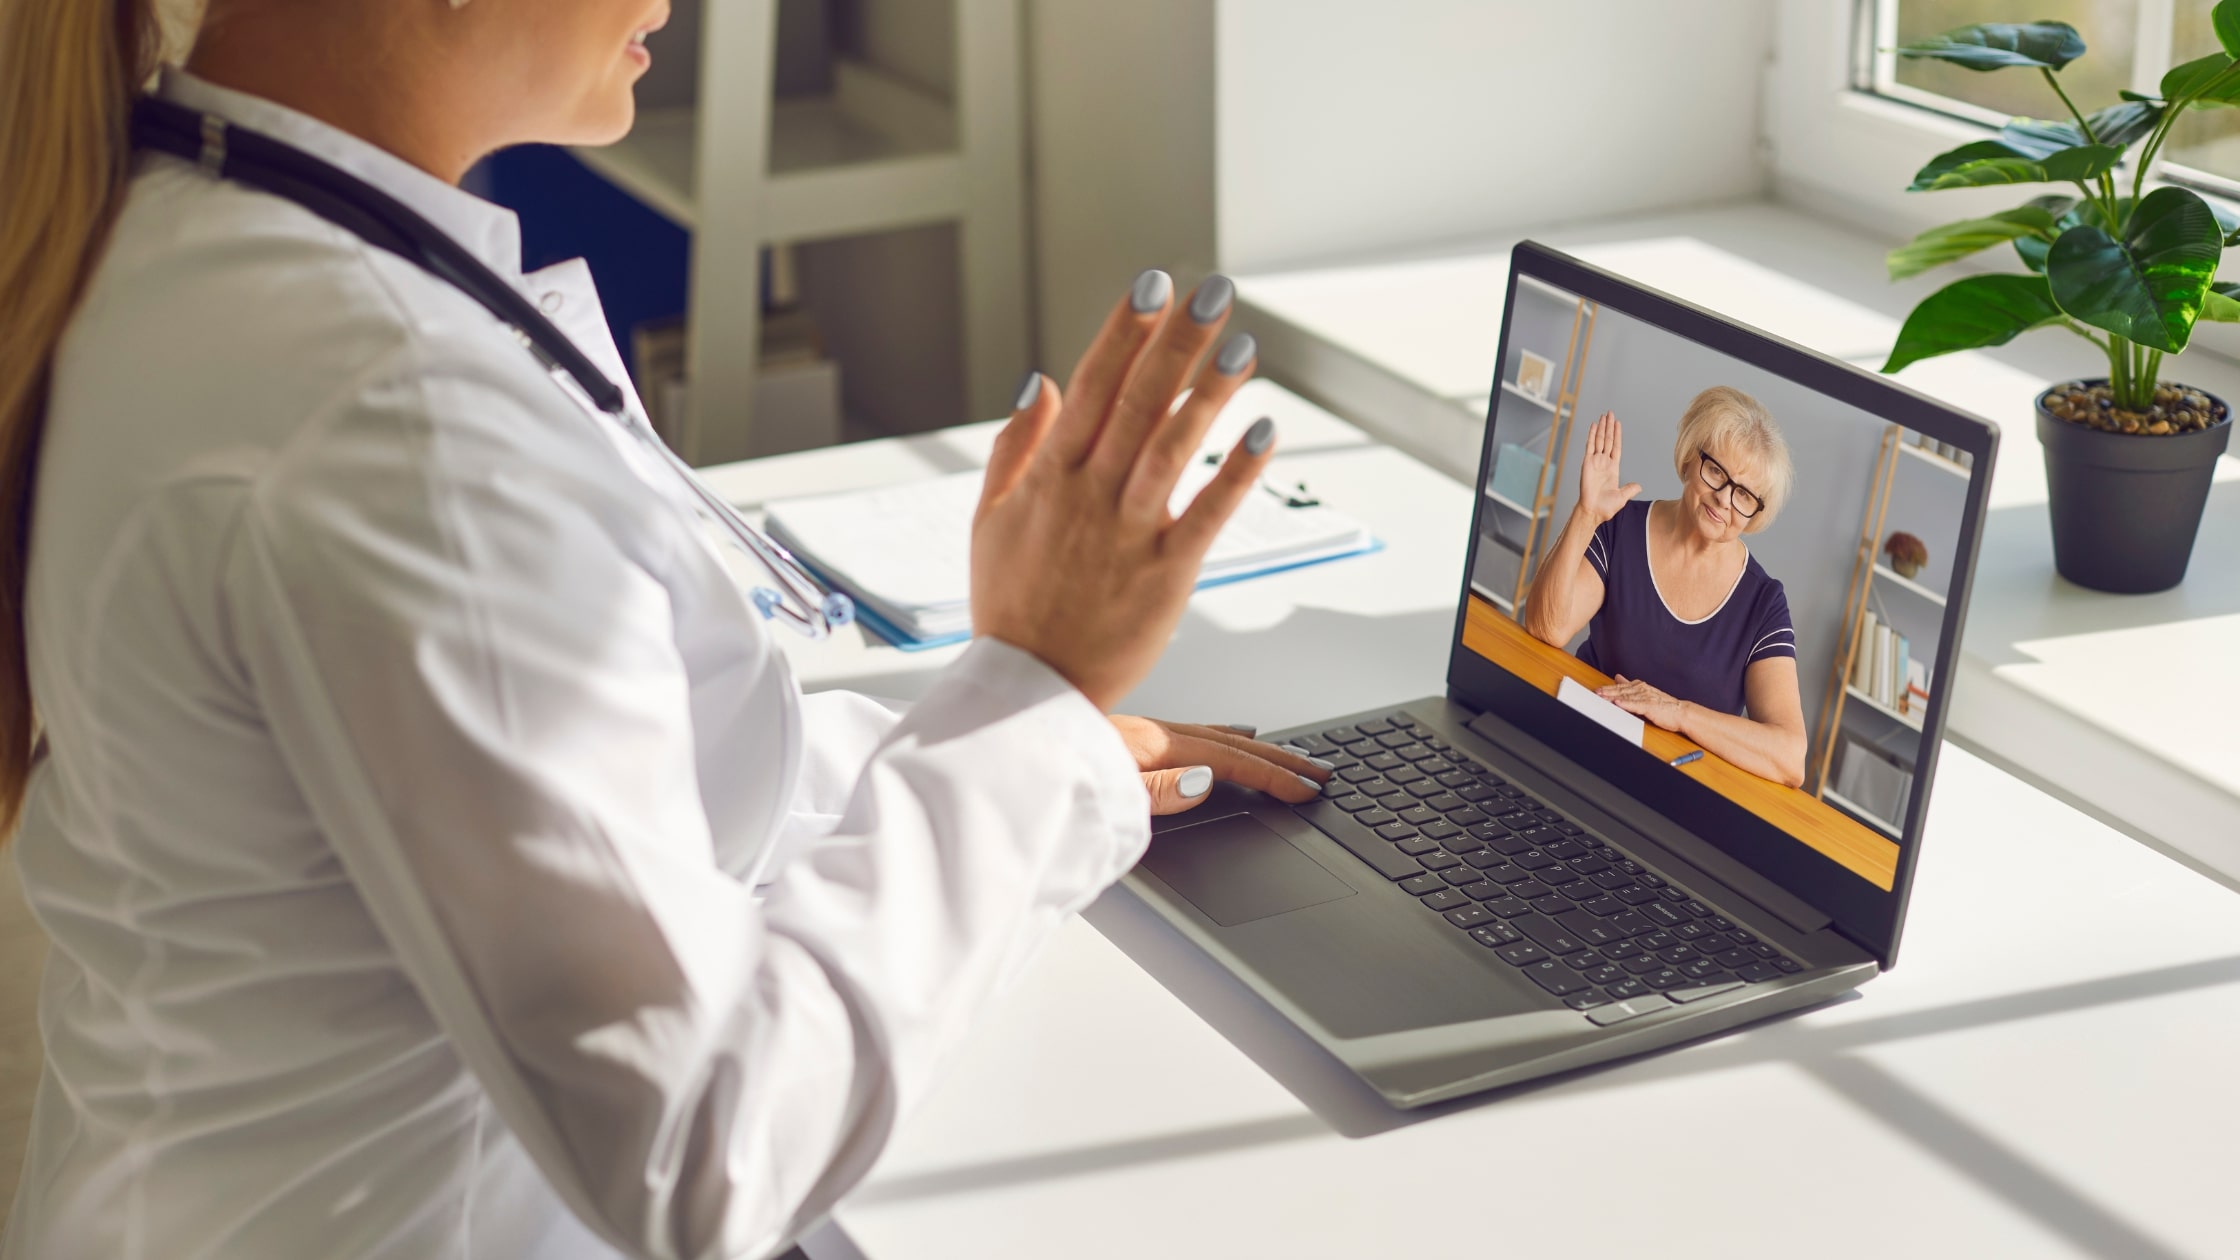 Telehealth’s Impact is Undeniable, But Some Tweaks are in Order